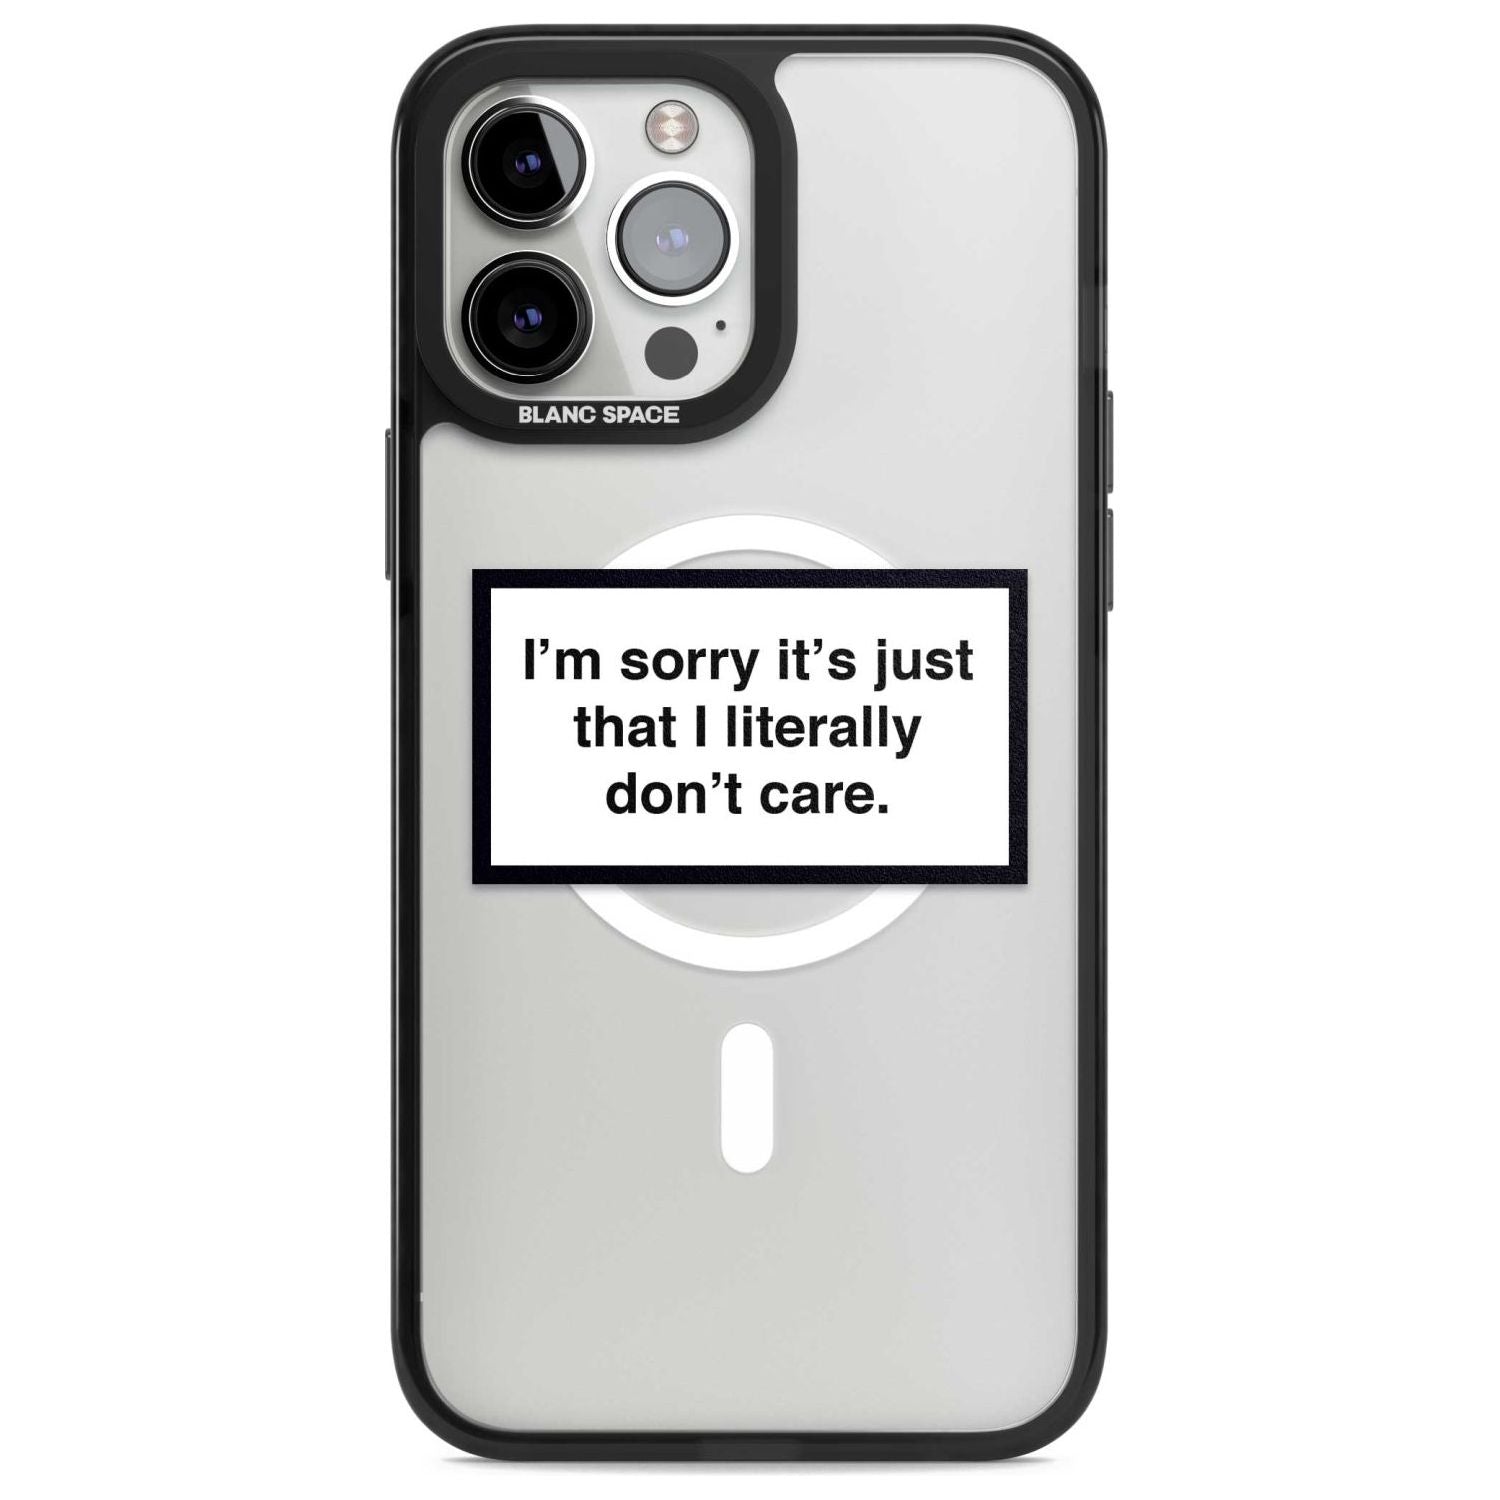 I Literally Don't Care Phone Case iPhone 13 Pro Max / Magsafe Black Impact Case Blanc Space